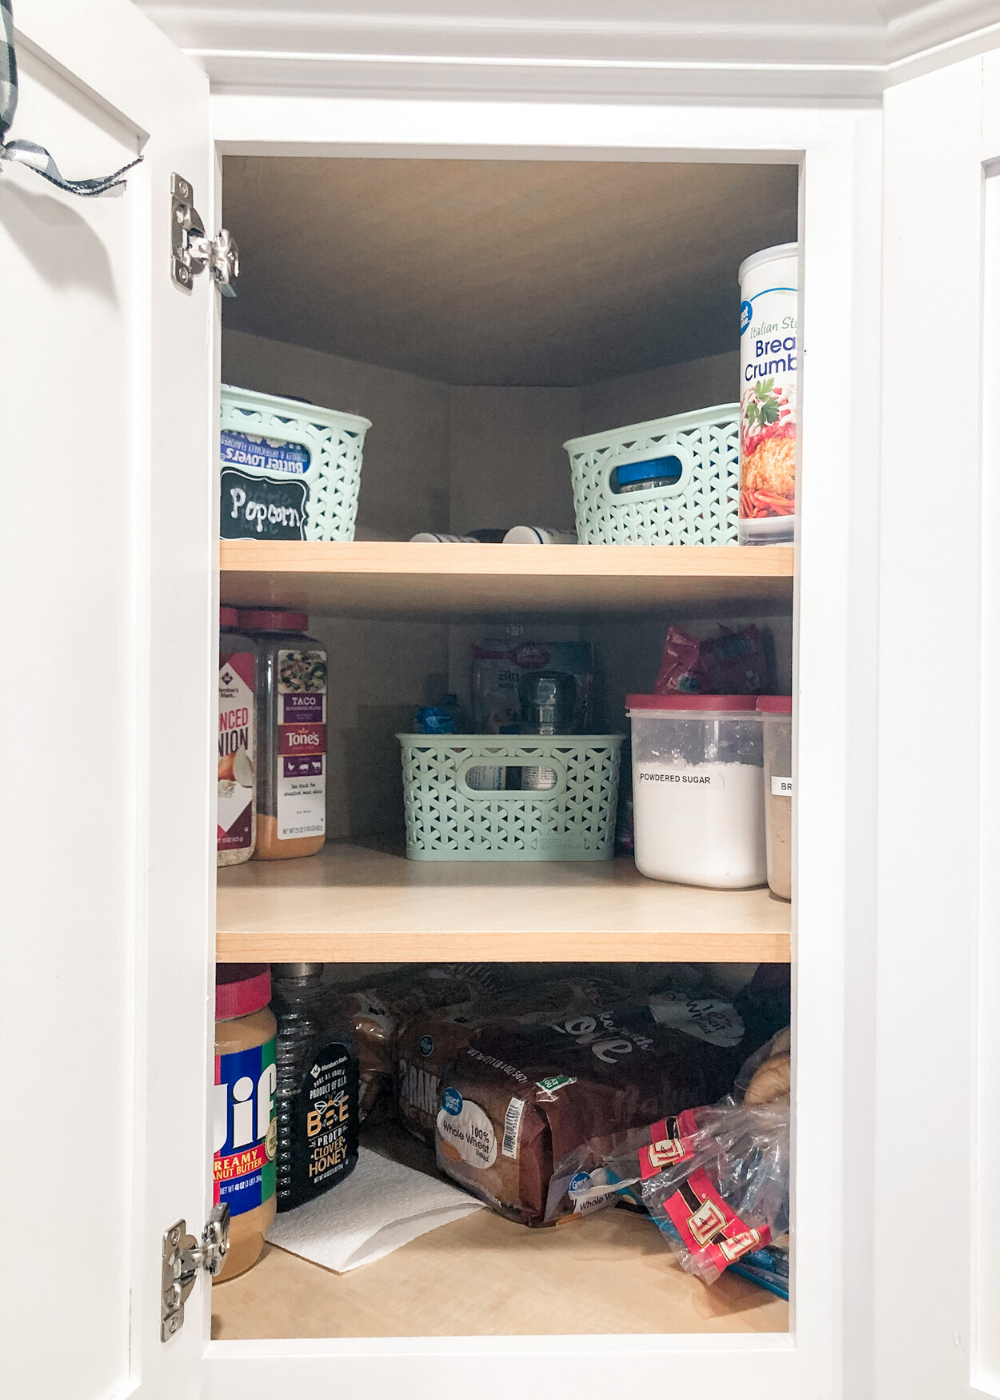 https://www.thesimplyorganizedhome.com/wp-content/uploads/2020/02/Kitchen-Organization-Food-Cabinet.png